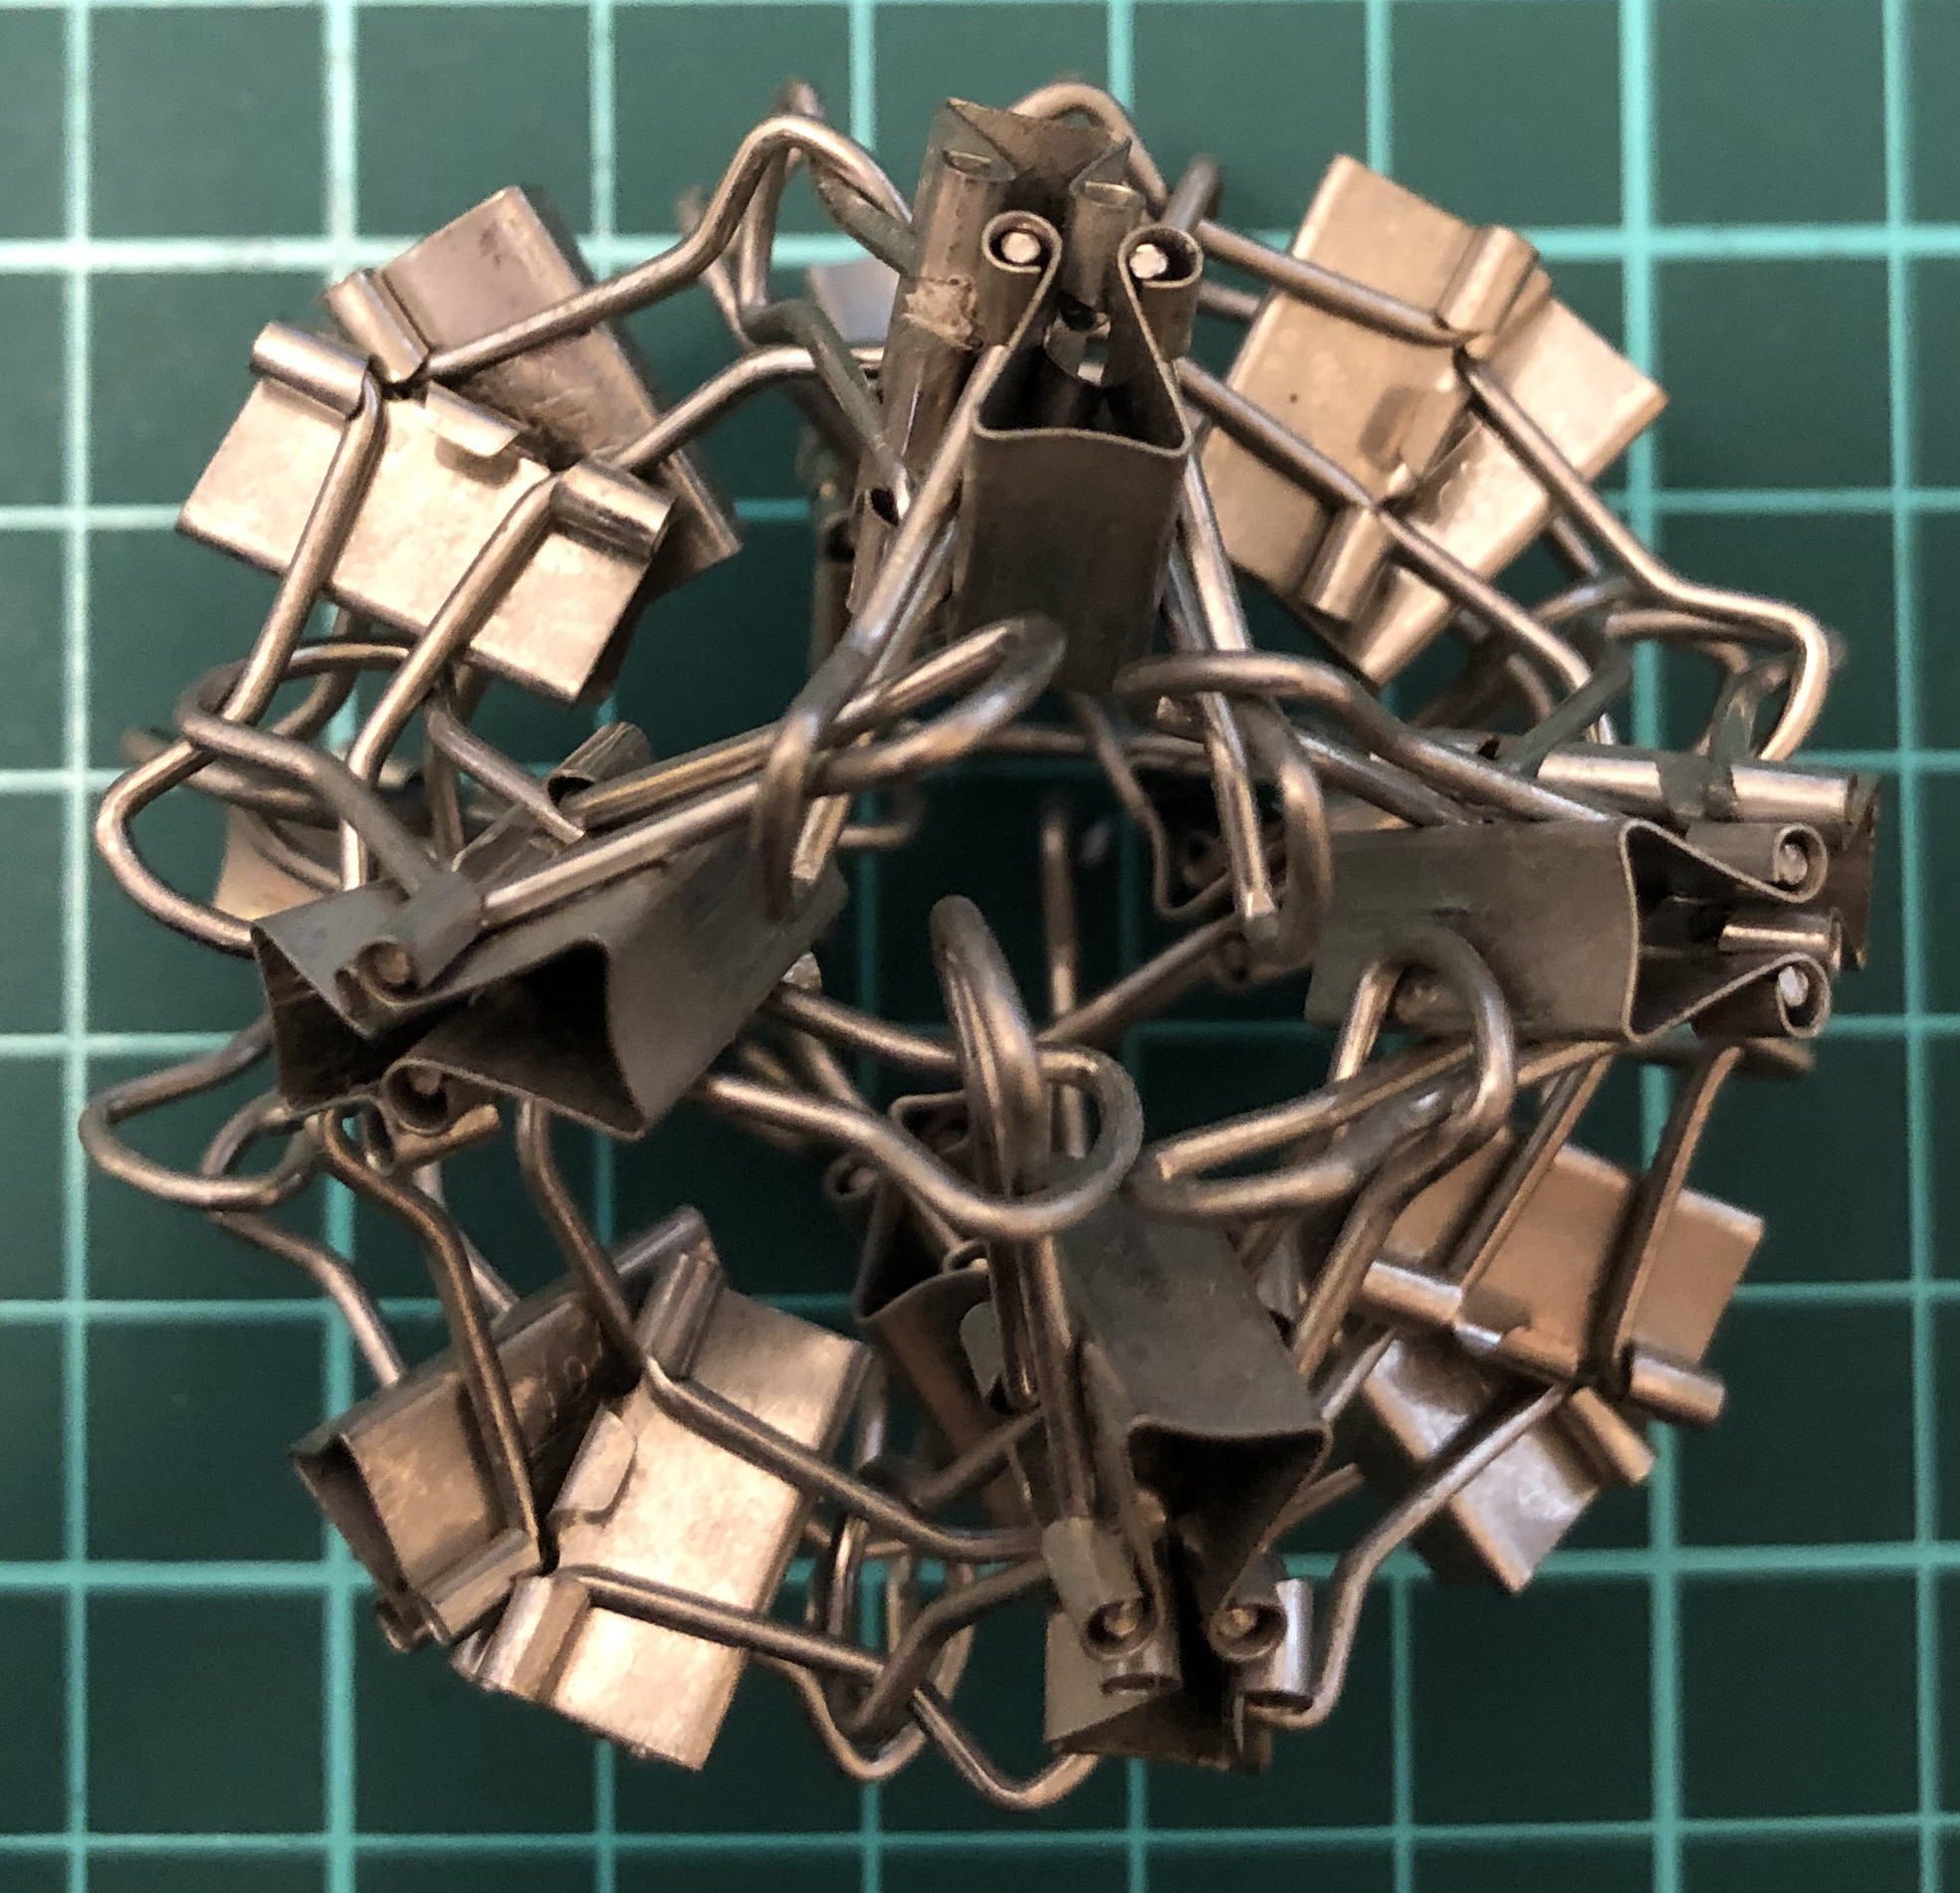 24 clips forming 12 X-edges forming octahedron